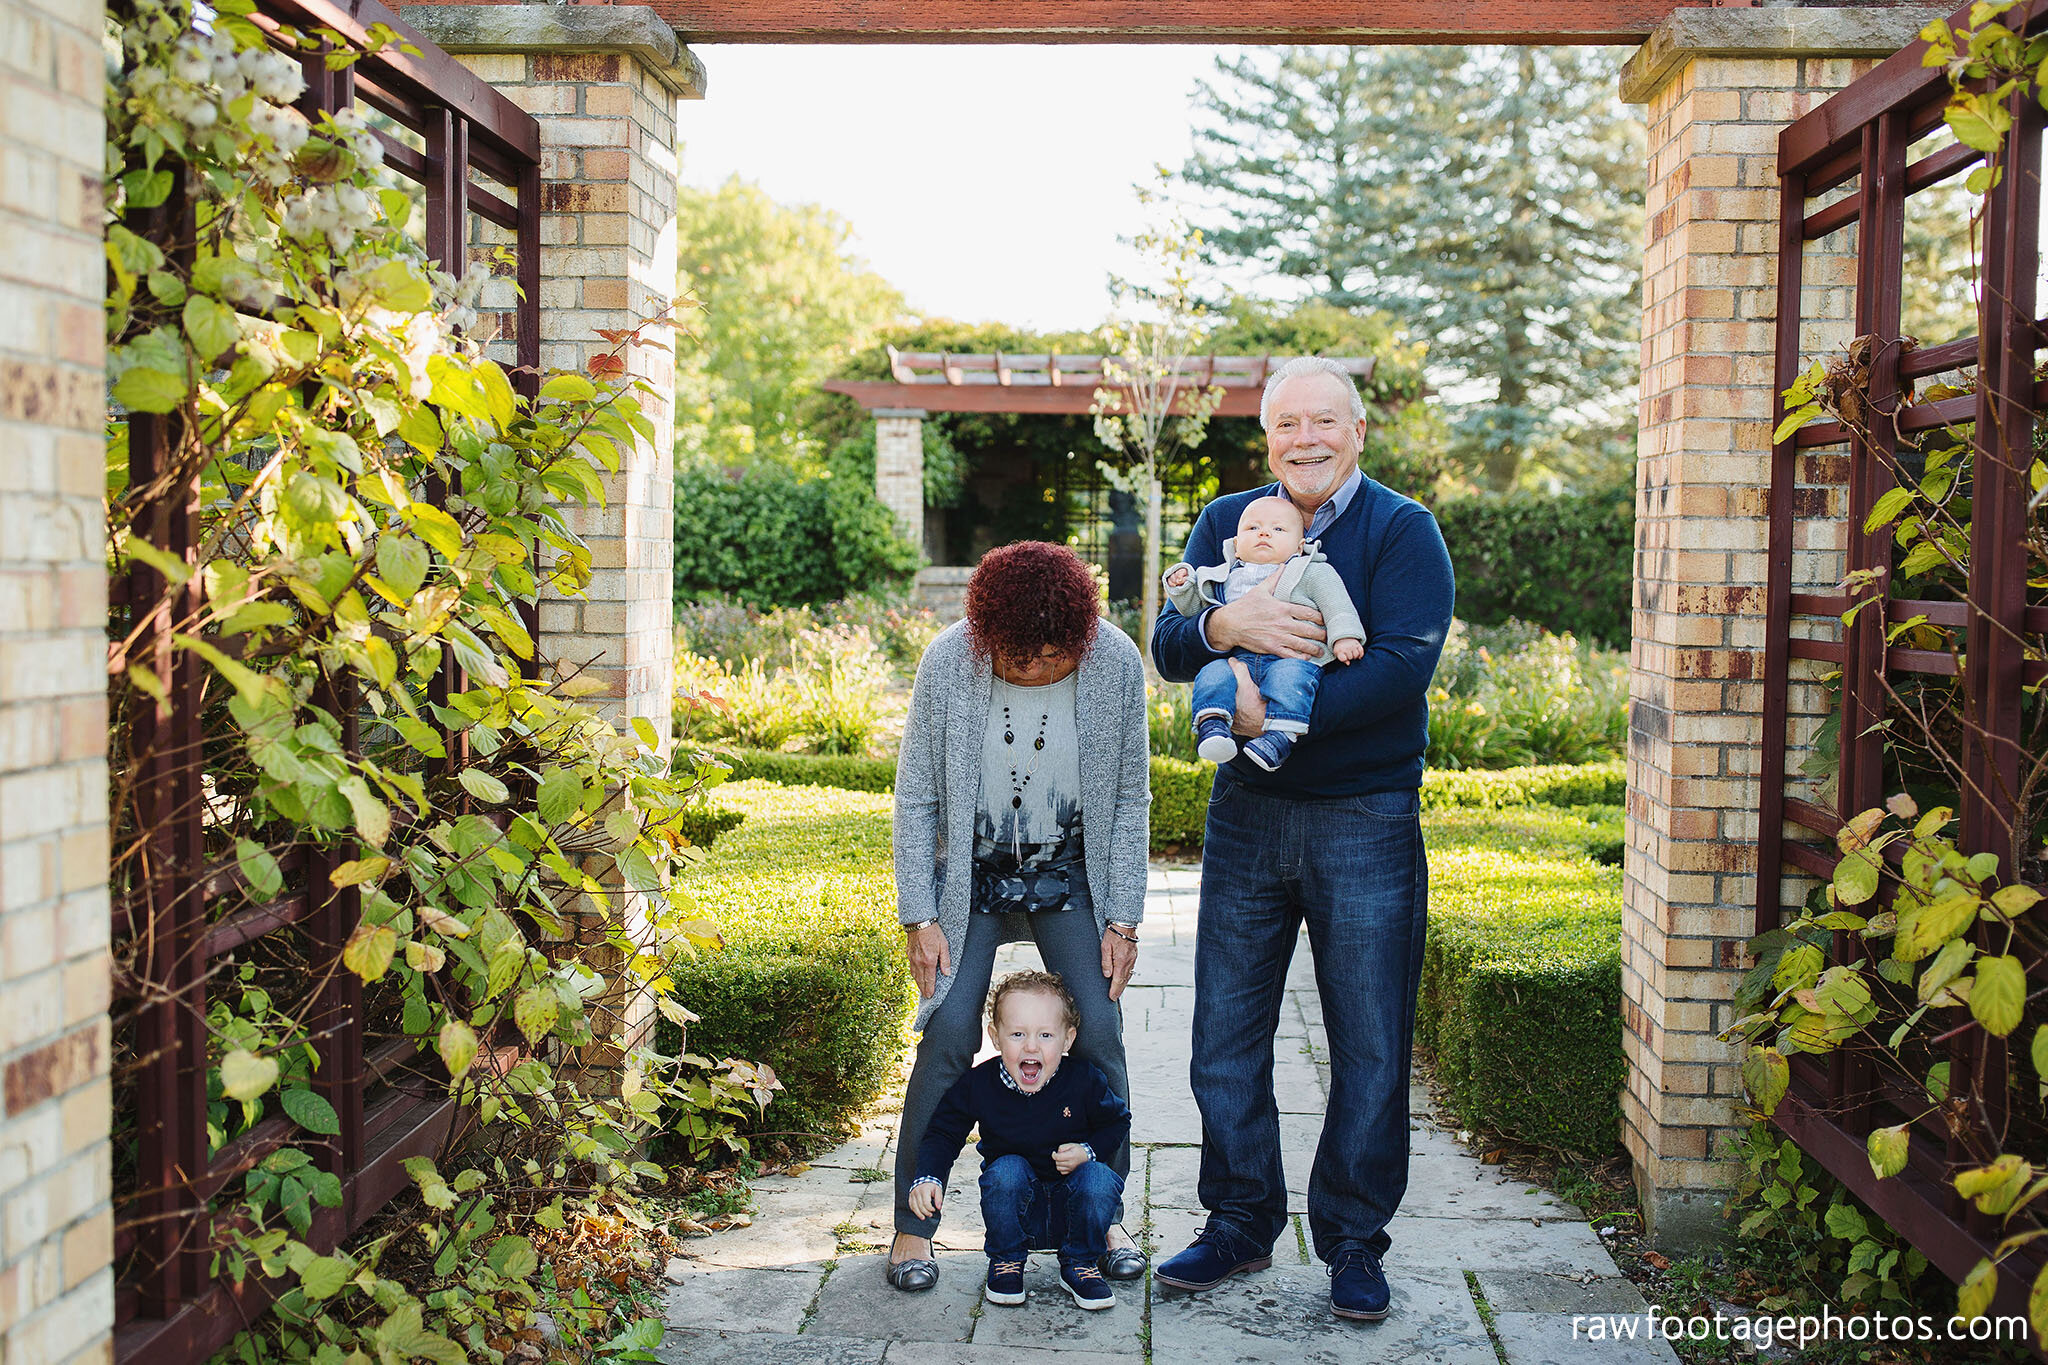 raw_footage_photography-london_ontario_family_photographer-fall_extended_family_session-grandparents-003.jpg